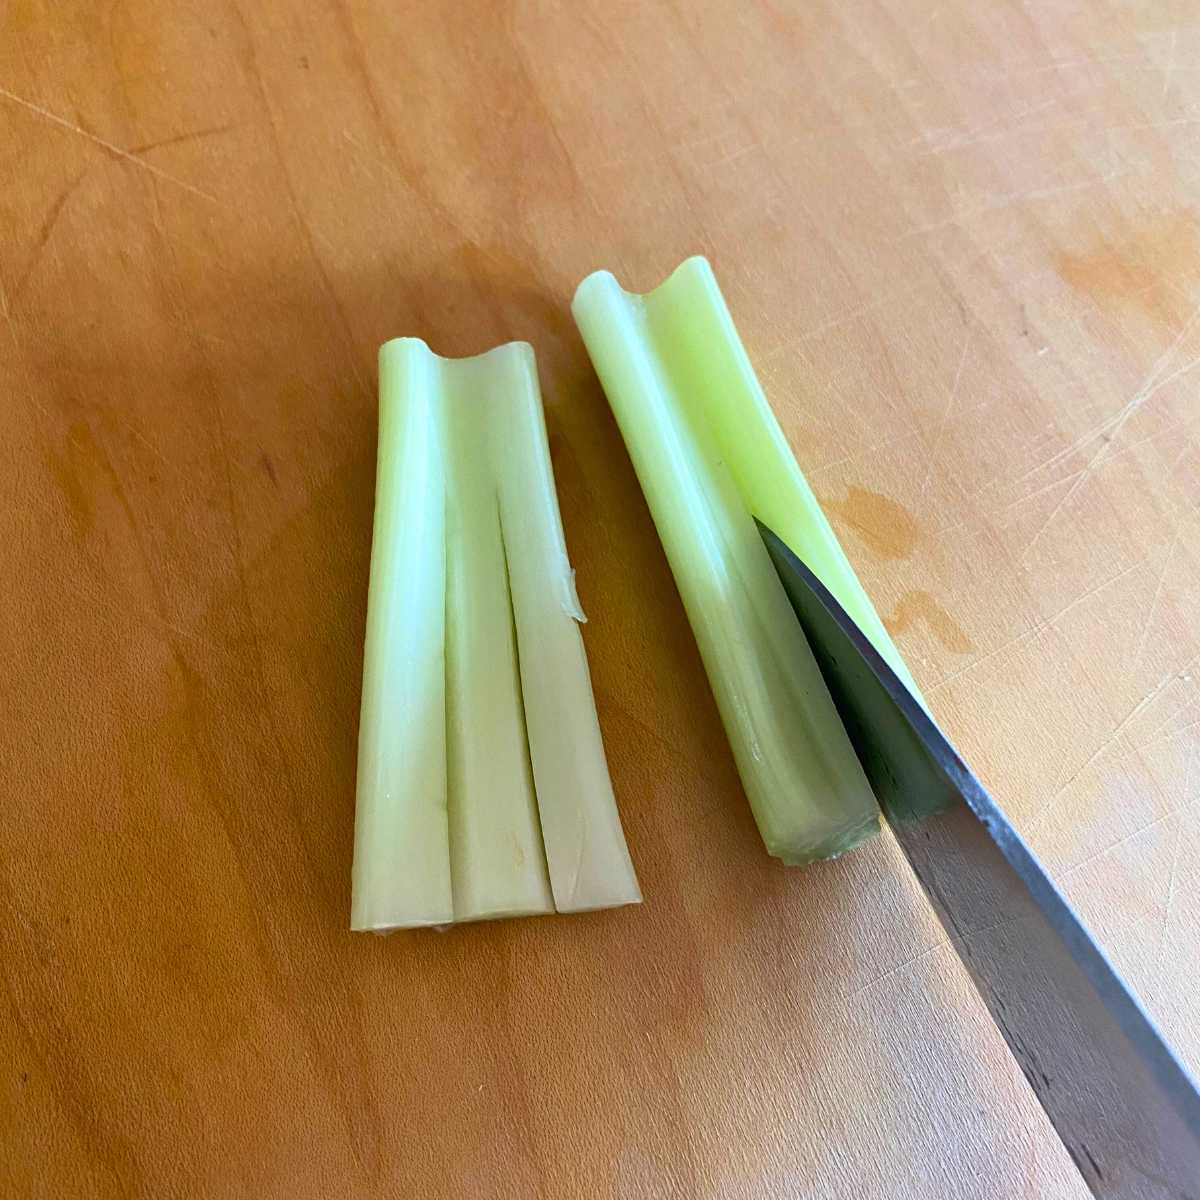 Two short pieces of celery with two slices down the middle to create three sections.